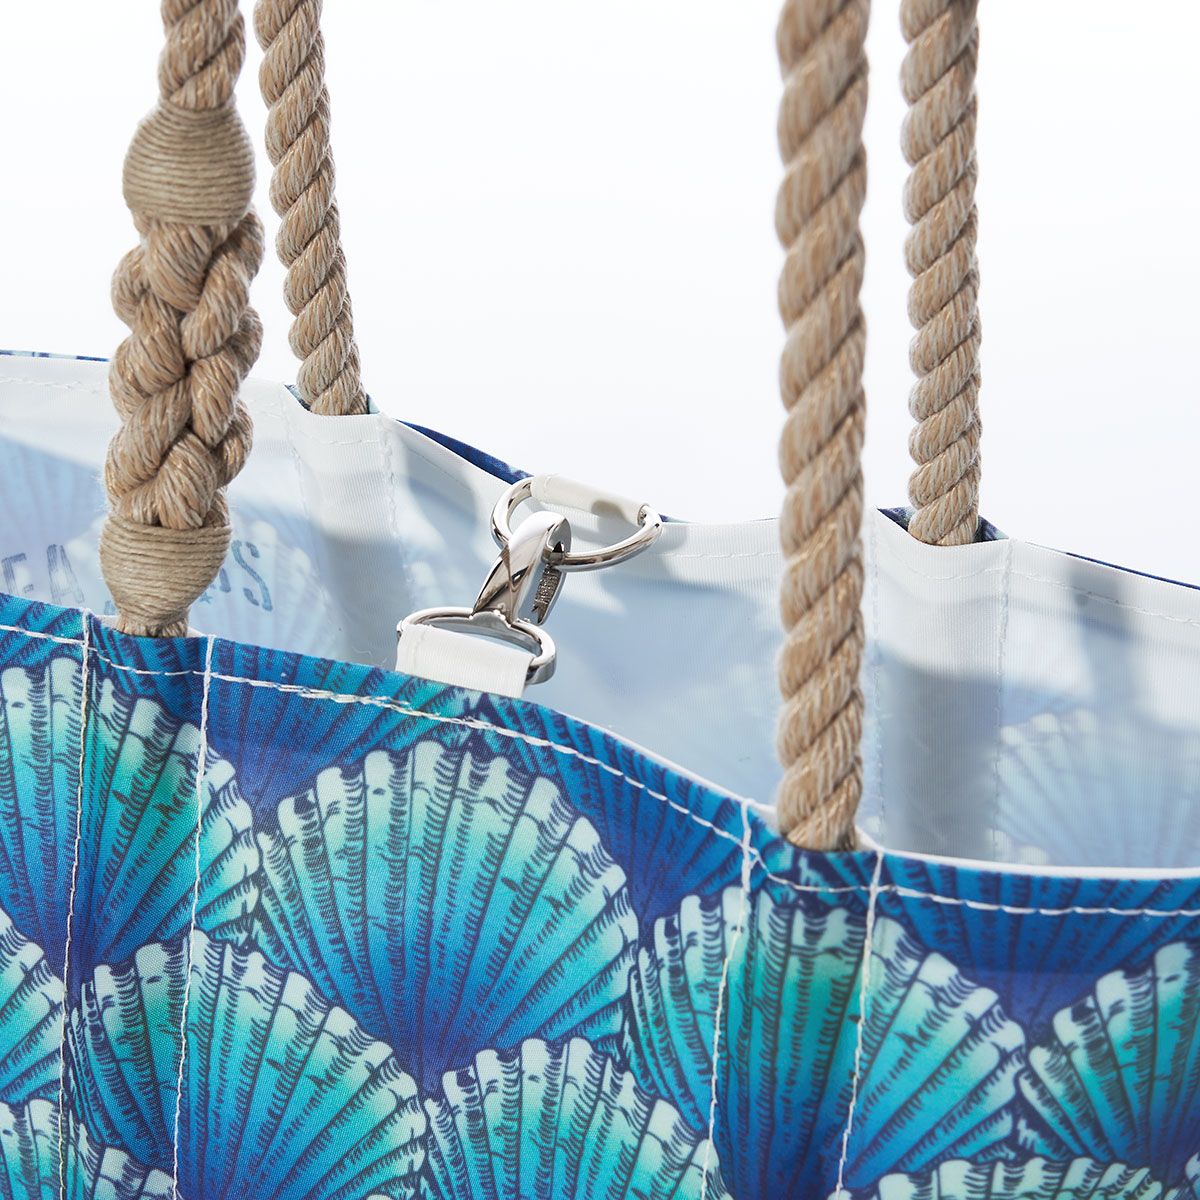 close up of clasp closure on a recycled sail cloth handbag with hemp rope handles is printed with a repeating pattern of blue scallop shells